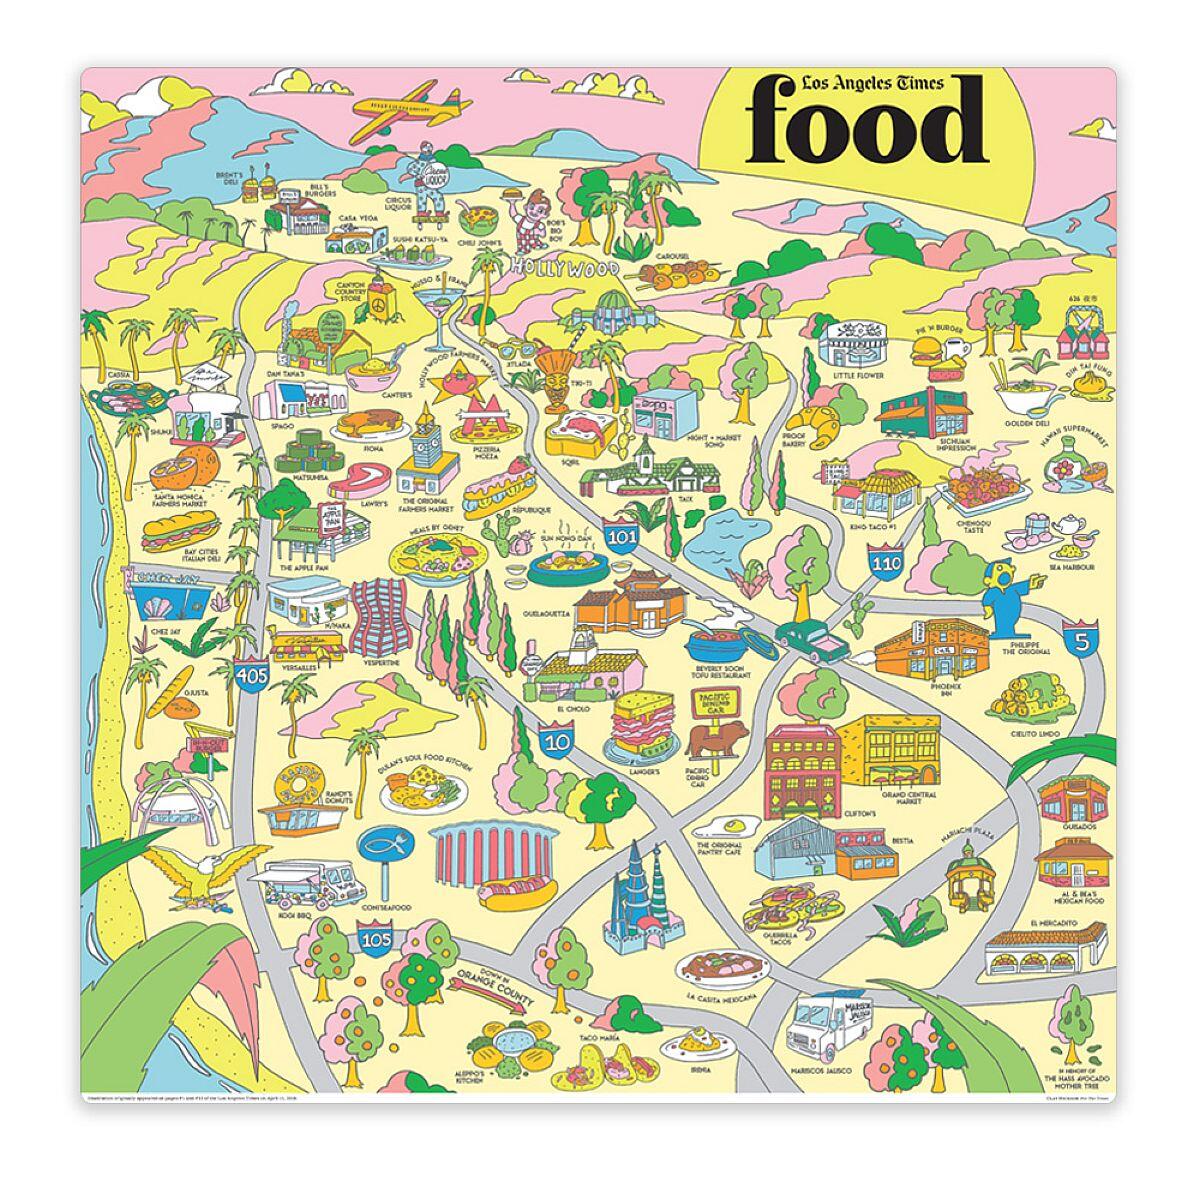 Los Angeles Times Food map